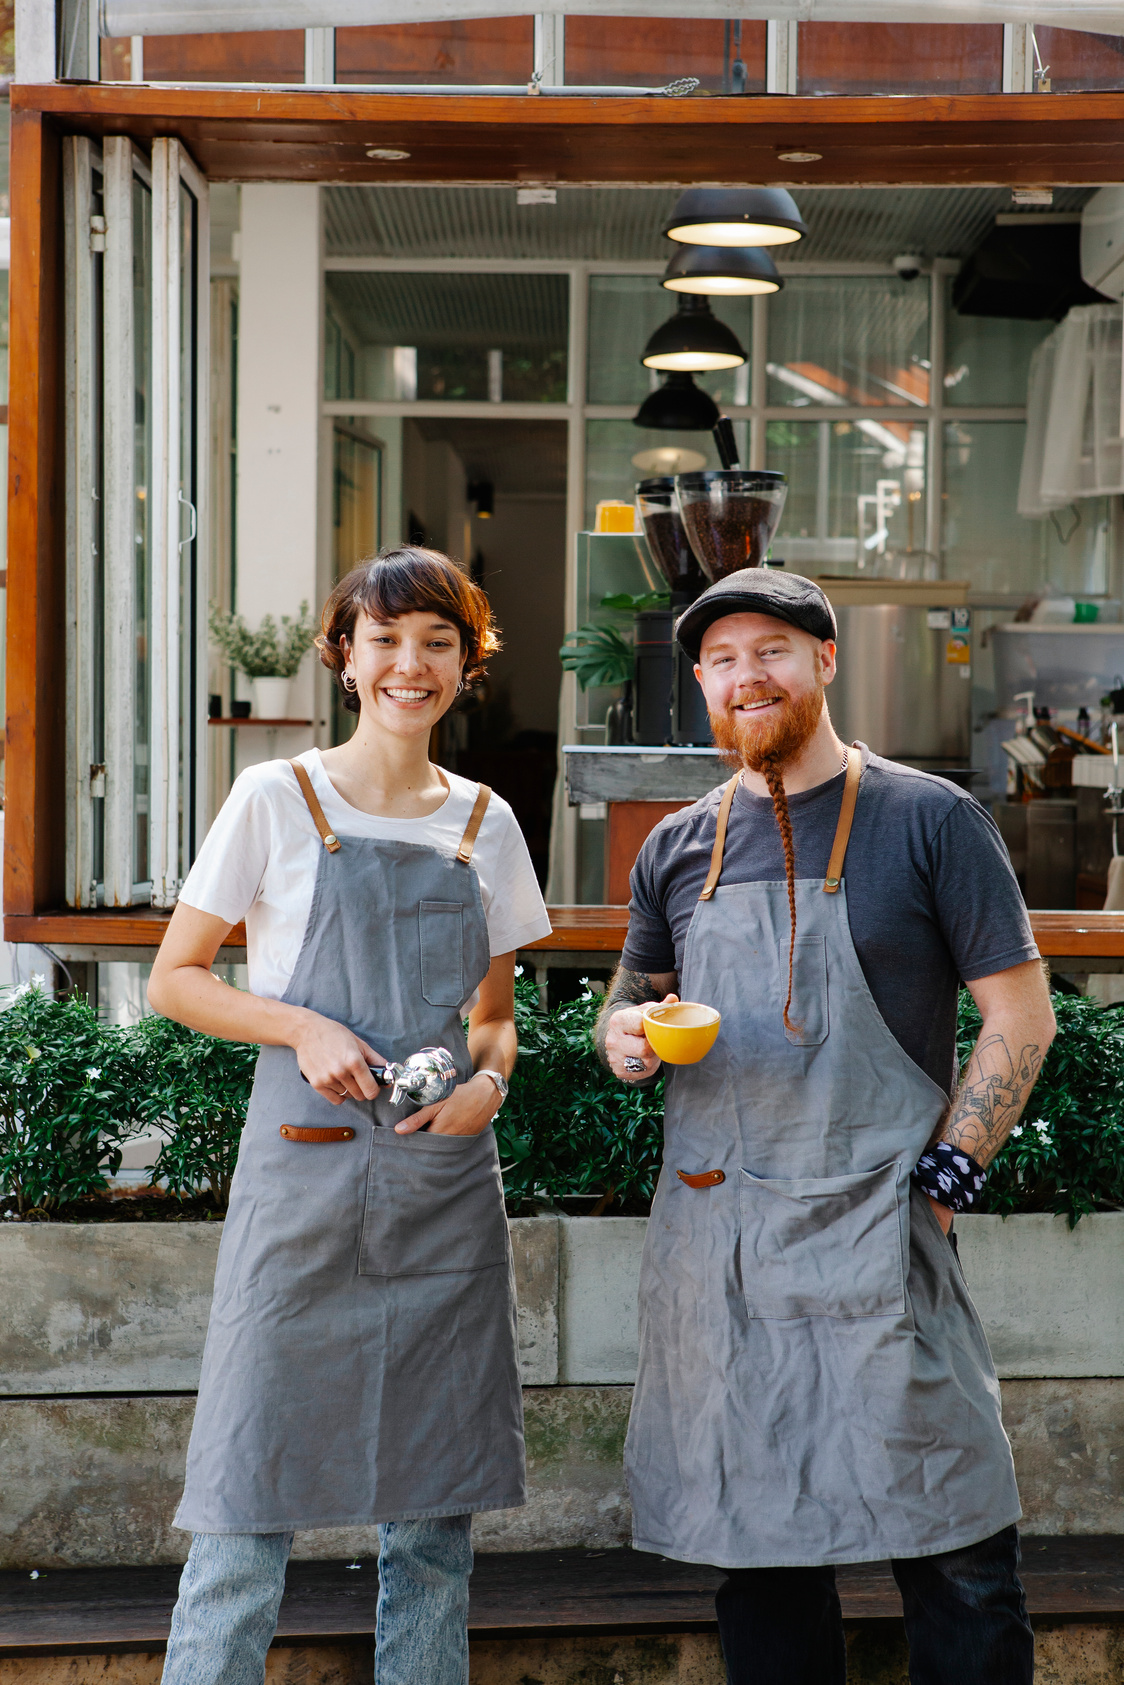 Cheerful baristas in aprons standing near coffee house